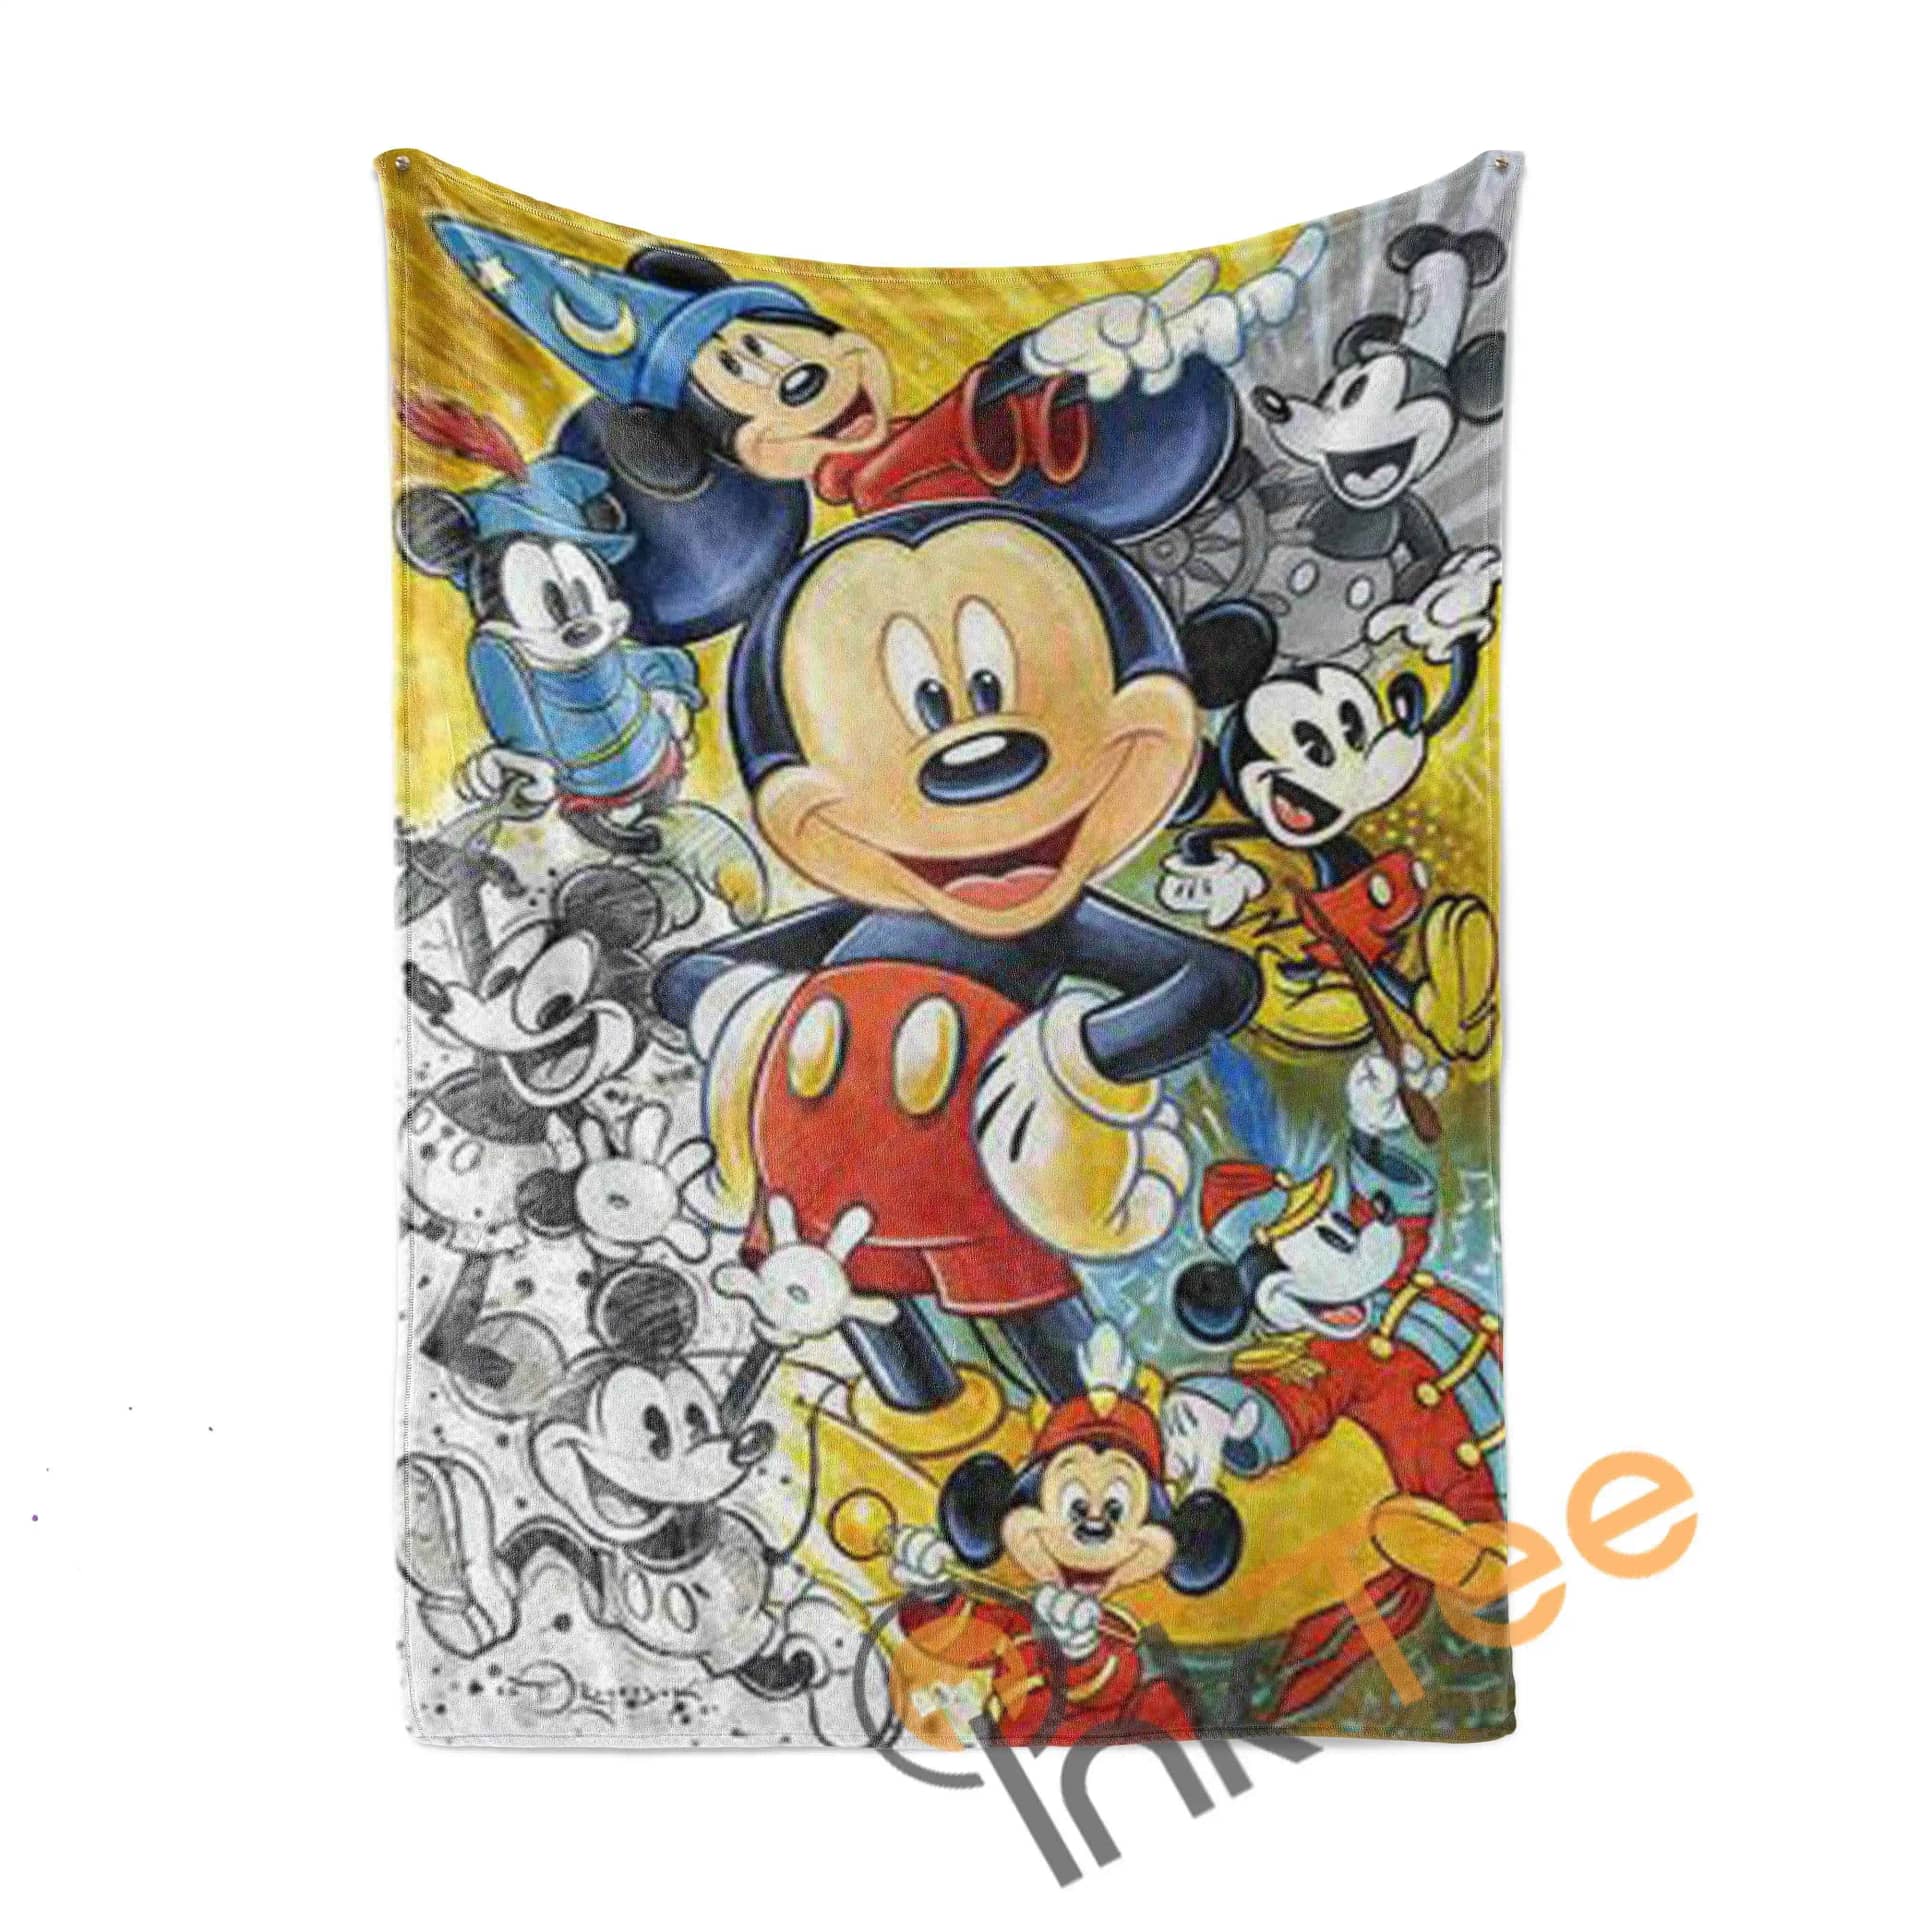 Colorful Mickey Mouse Limited Edition Area Amazon Best Seller 4109 Fleece Blanket